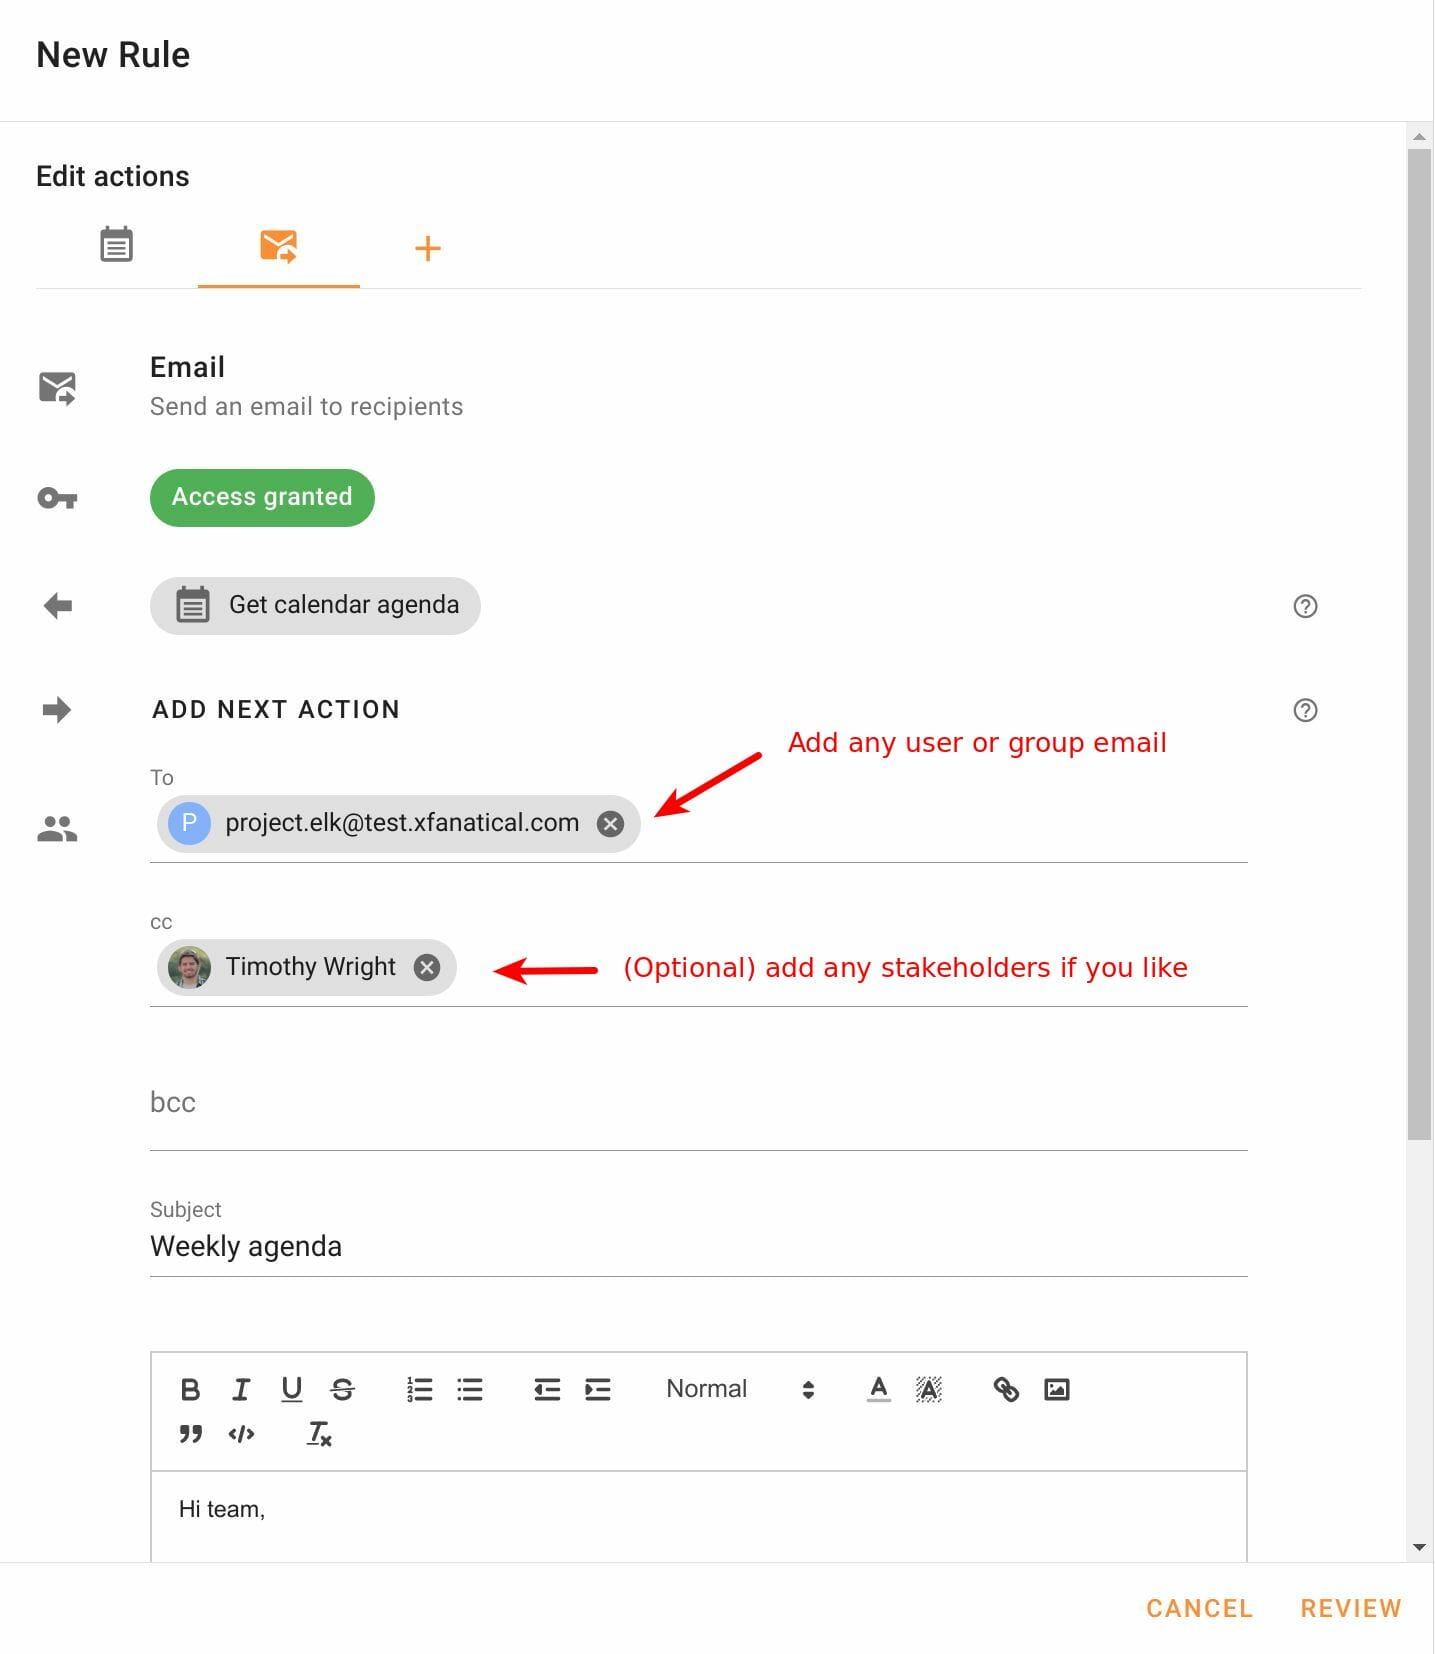 Configure Email action for weekly agenda in Foresight